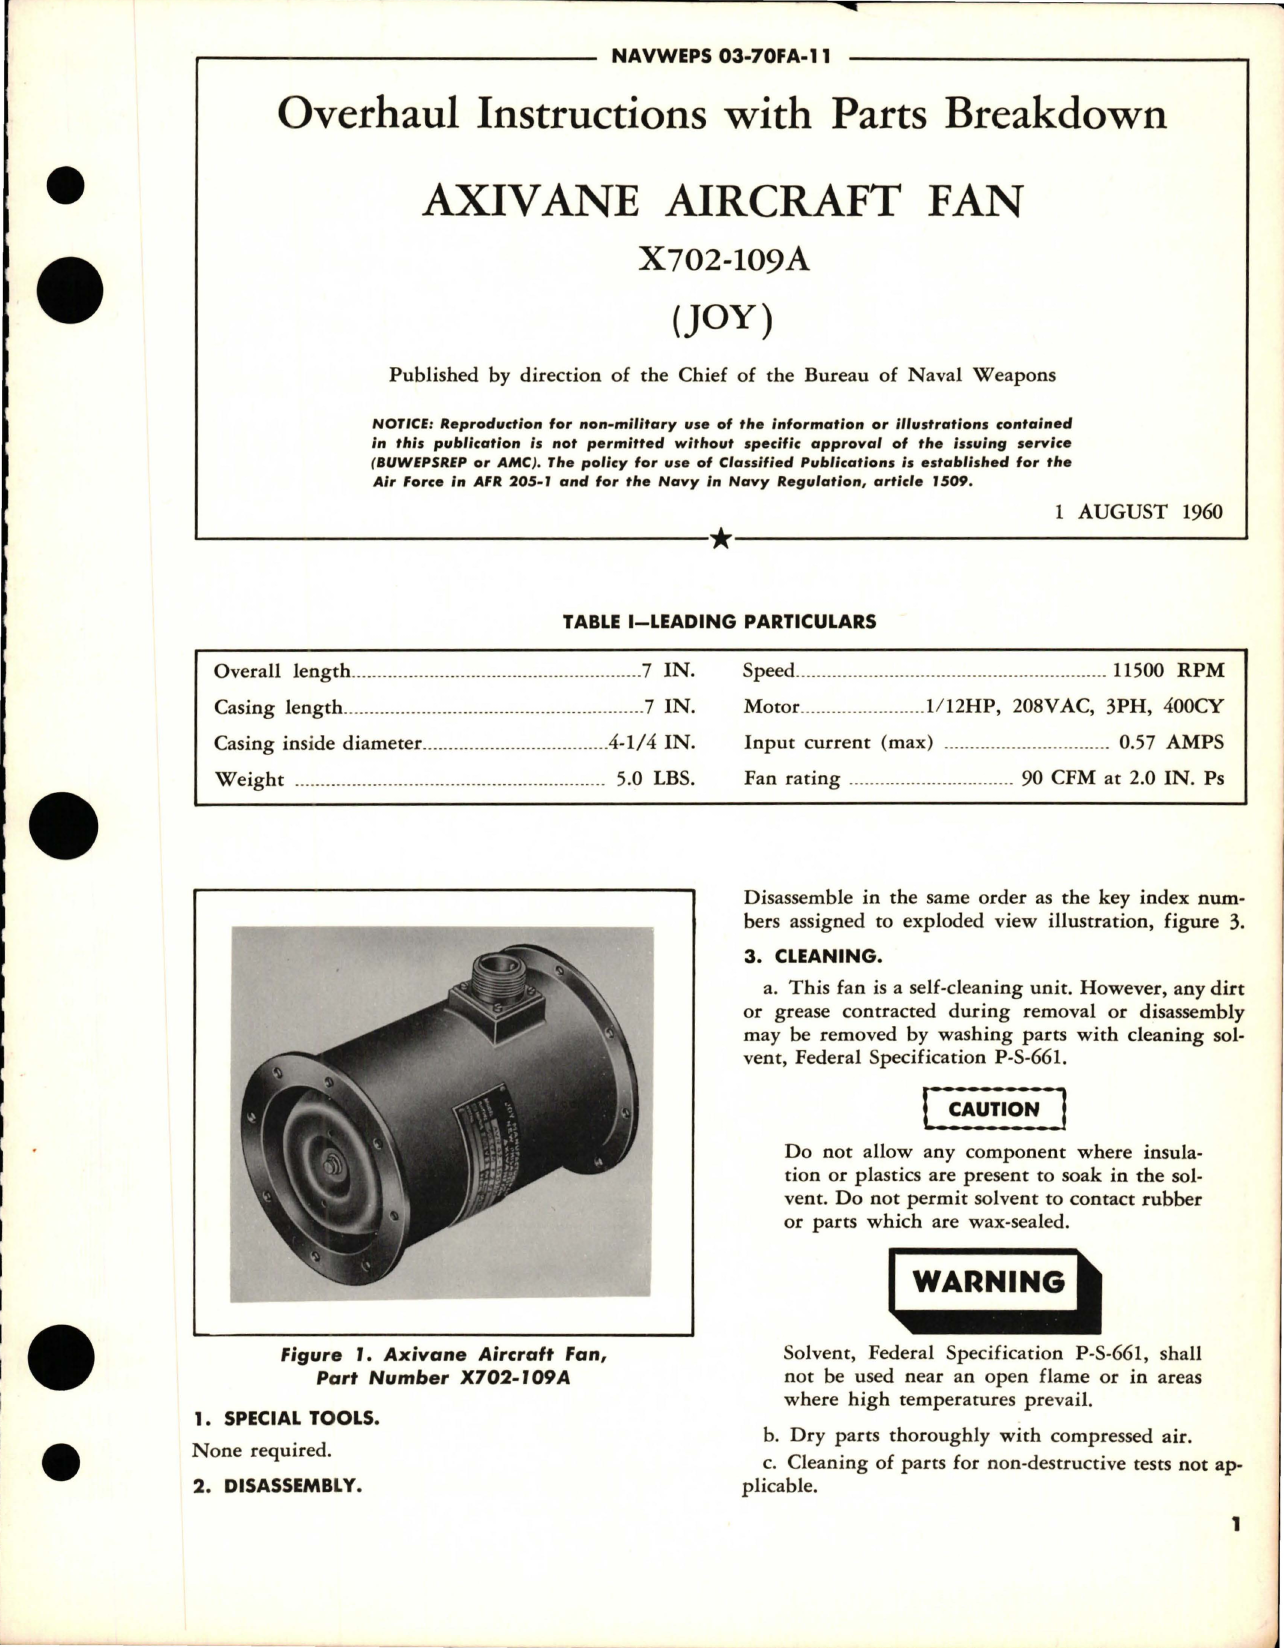 Sample page 1 from AirCorps Library document: Overhaul Instructions with Parts Breakdown for Axivane Aircraft Fan - X702-109A 